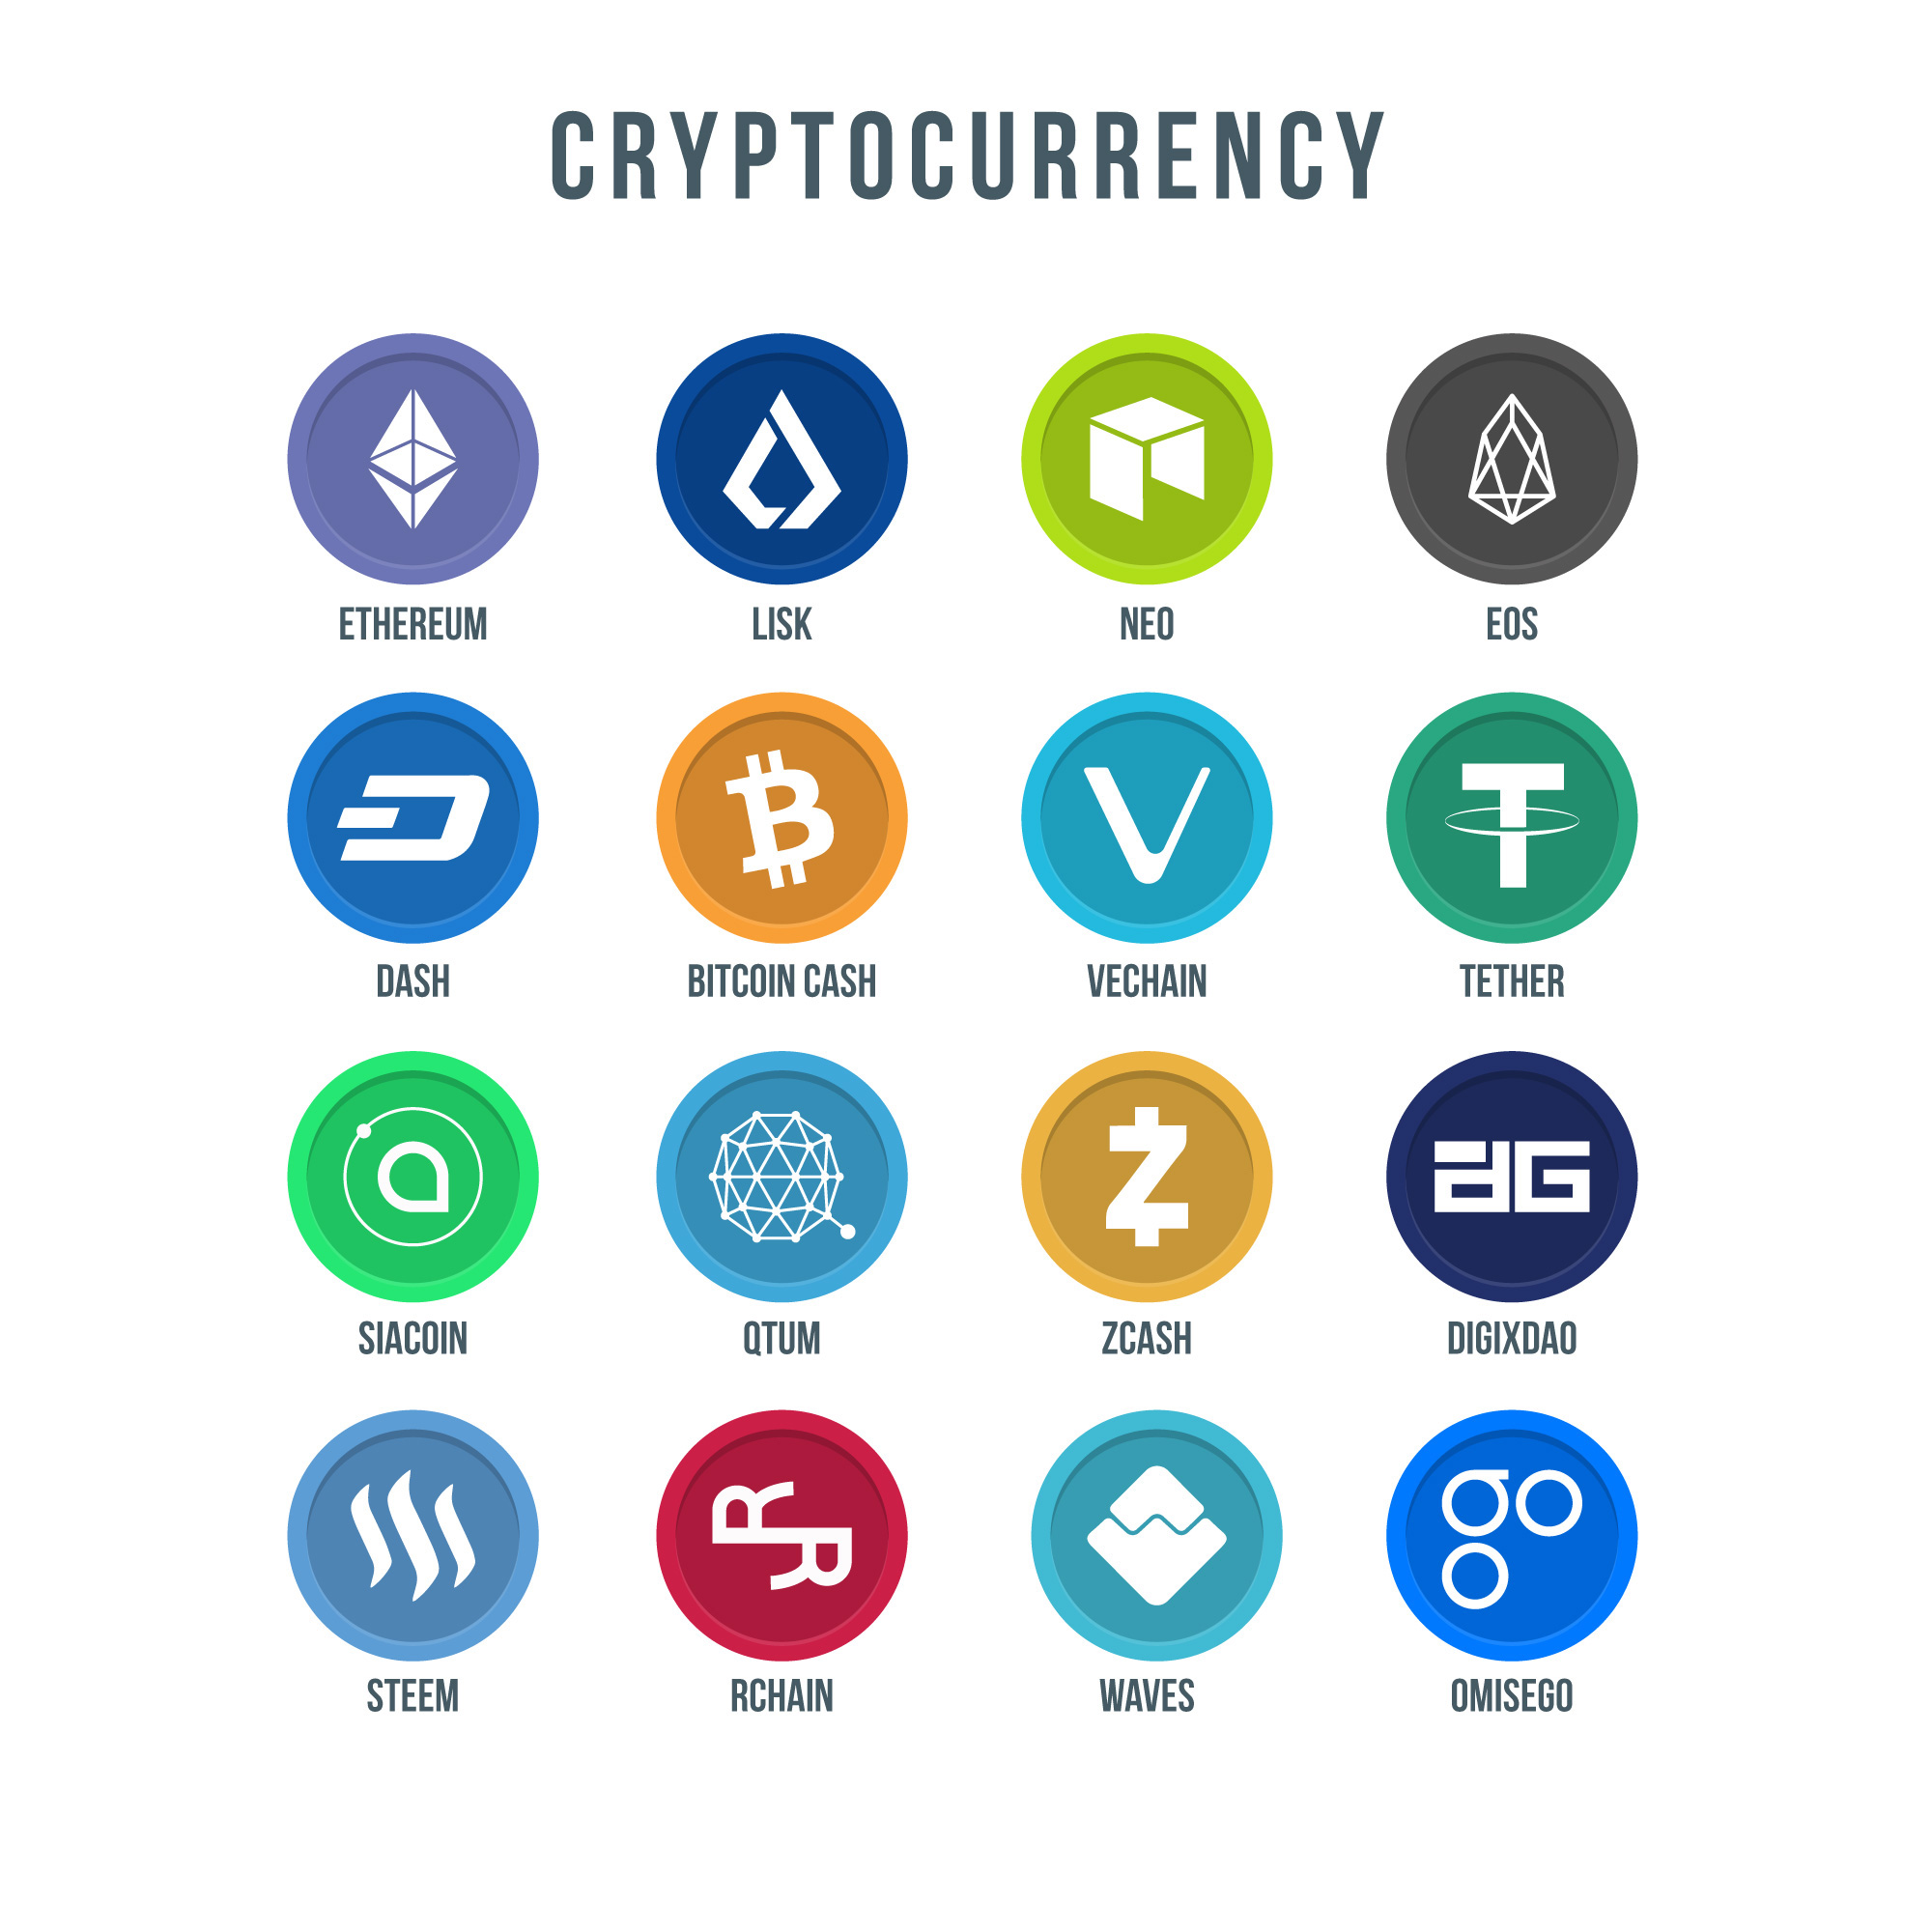 what crypto currencies are available to trade on blockfi